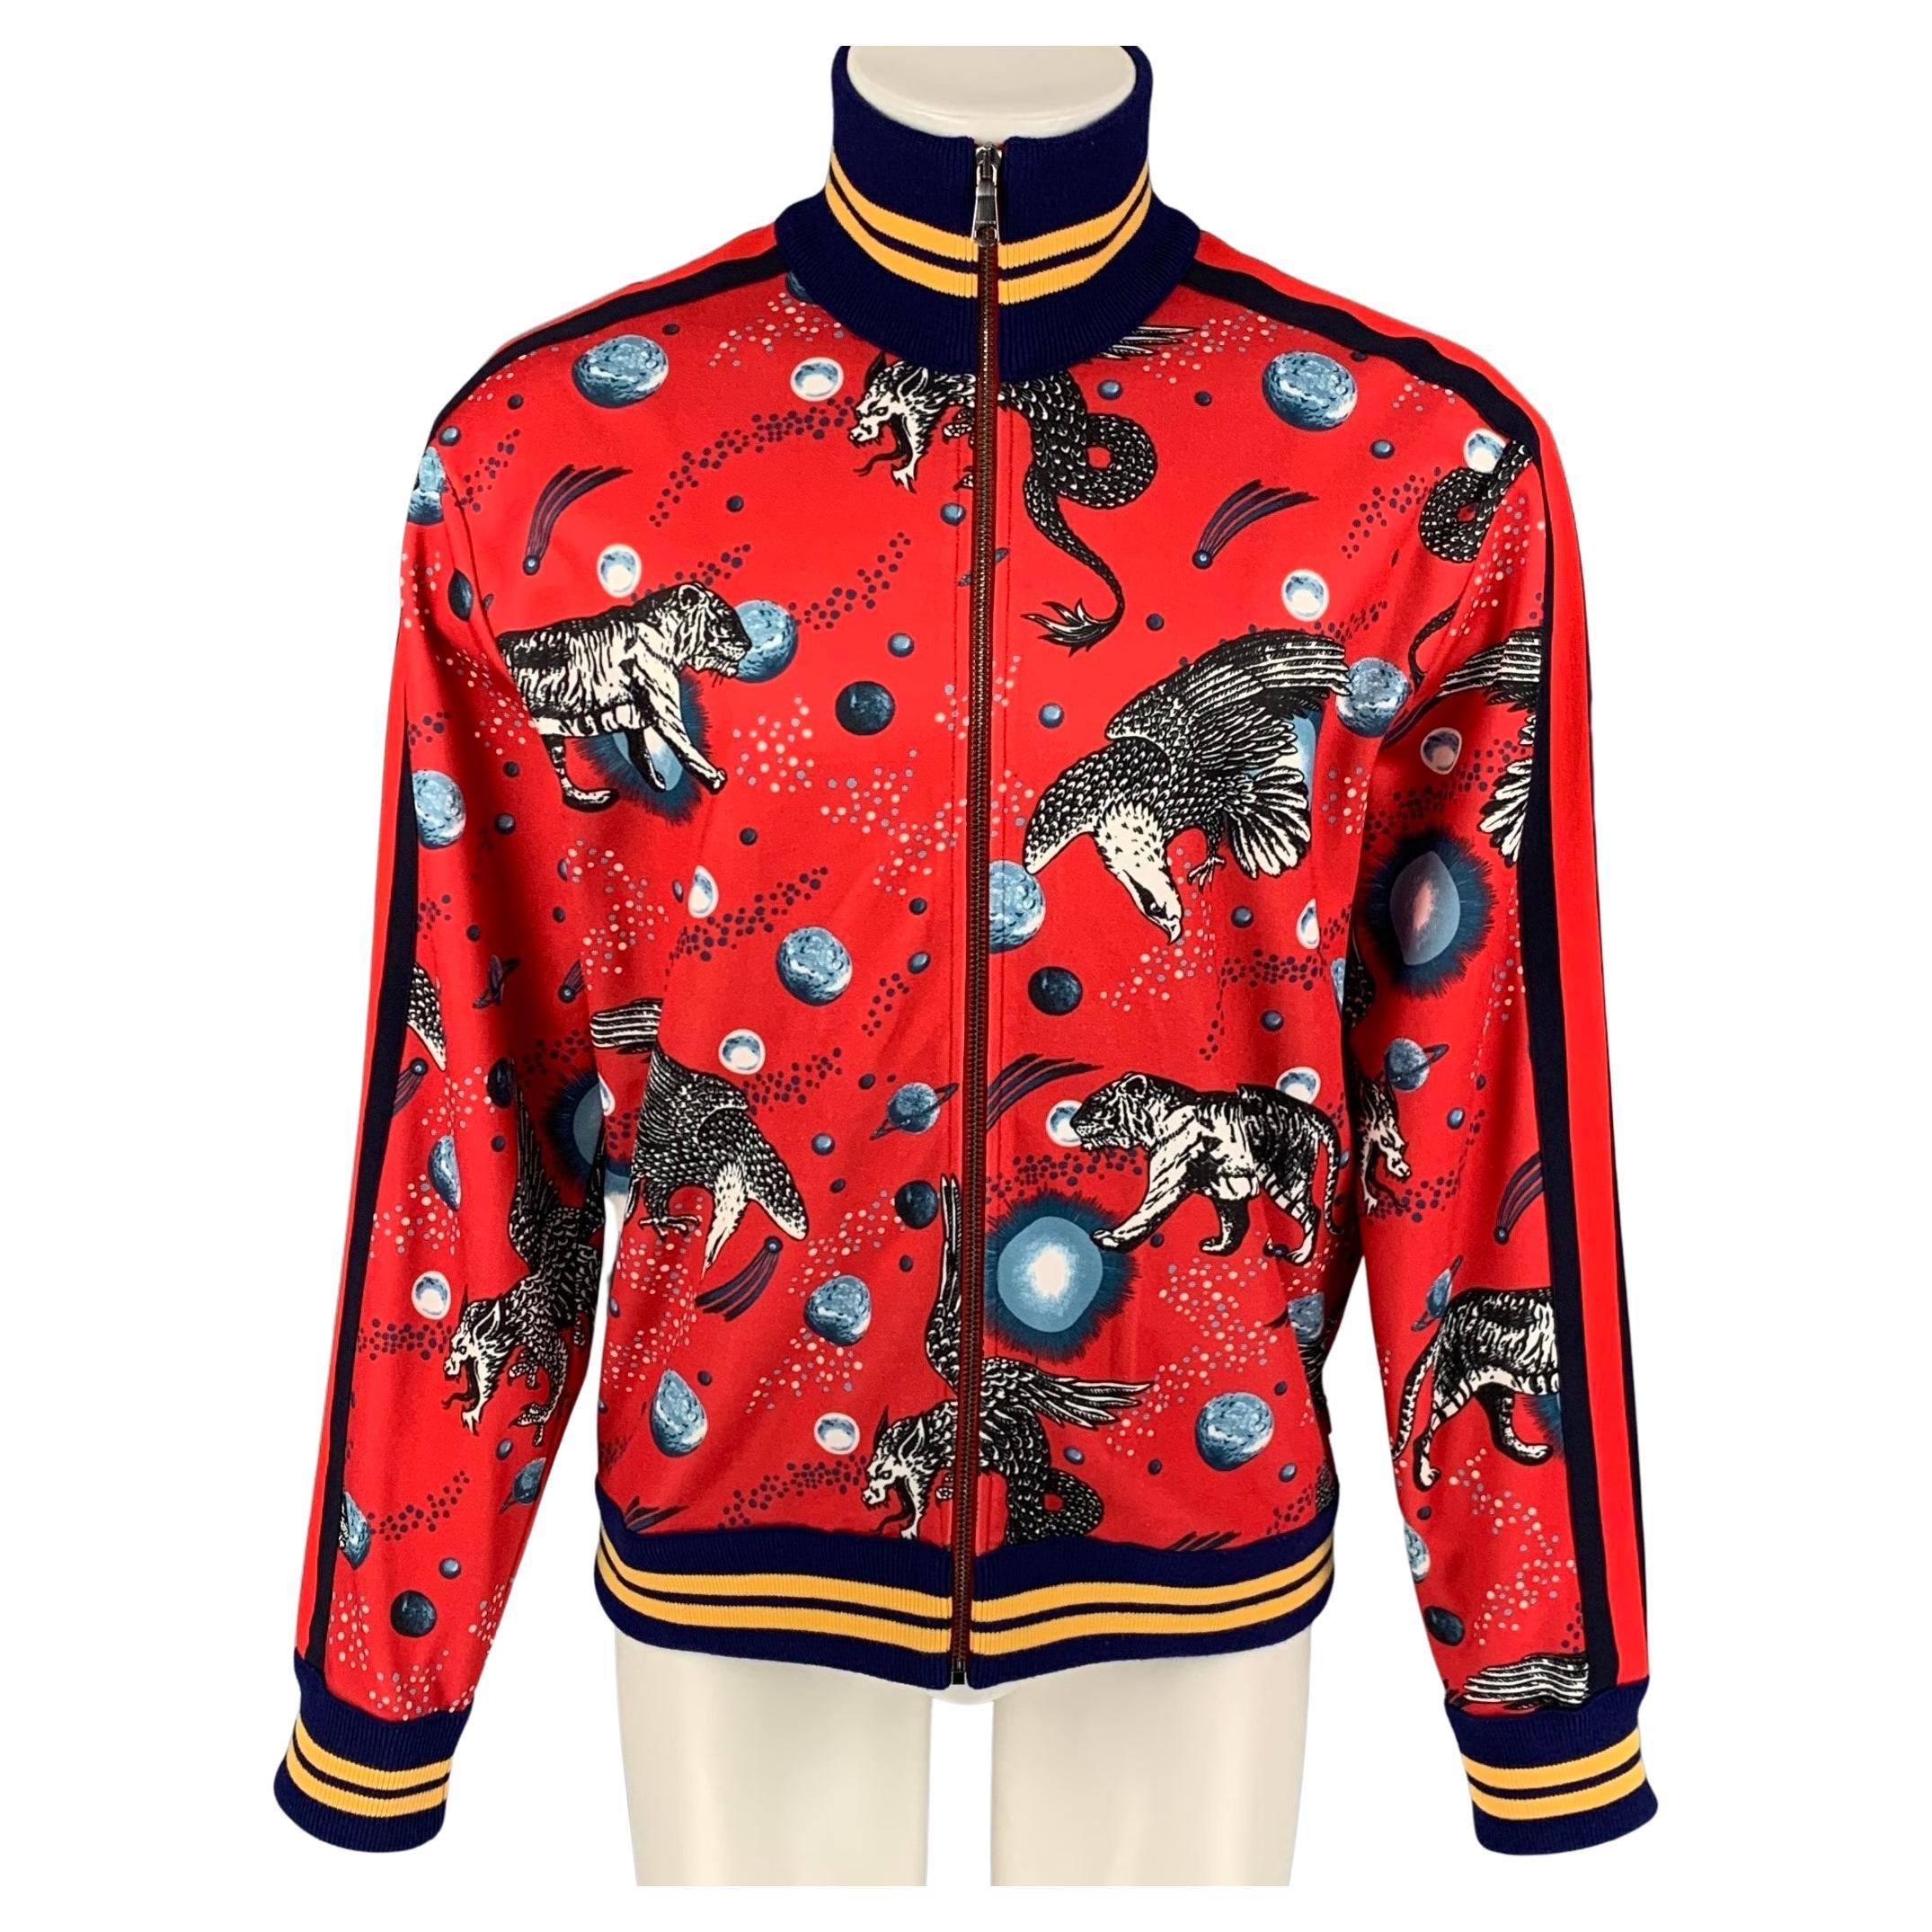 GUCCI by Alessandro Michele FW 17 Size M Red Graphic Polyester Cotton Jacket